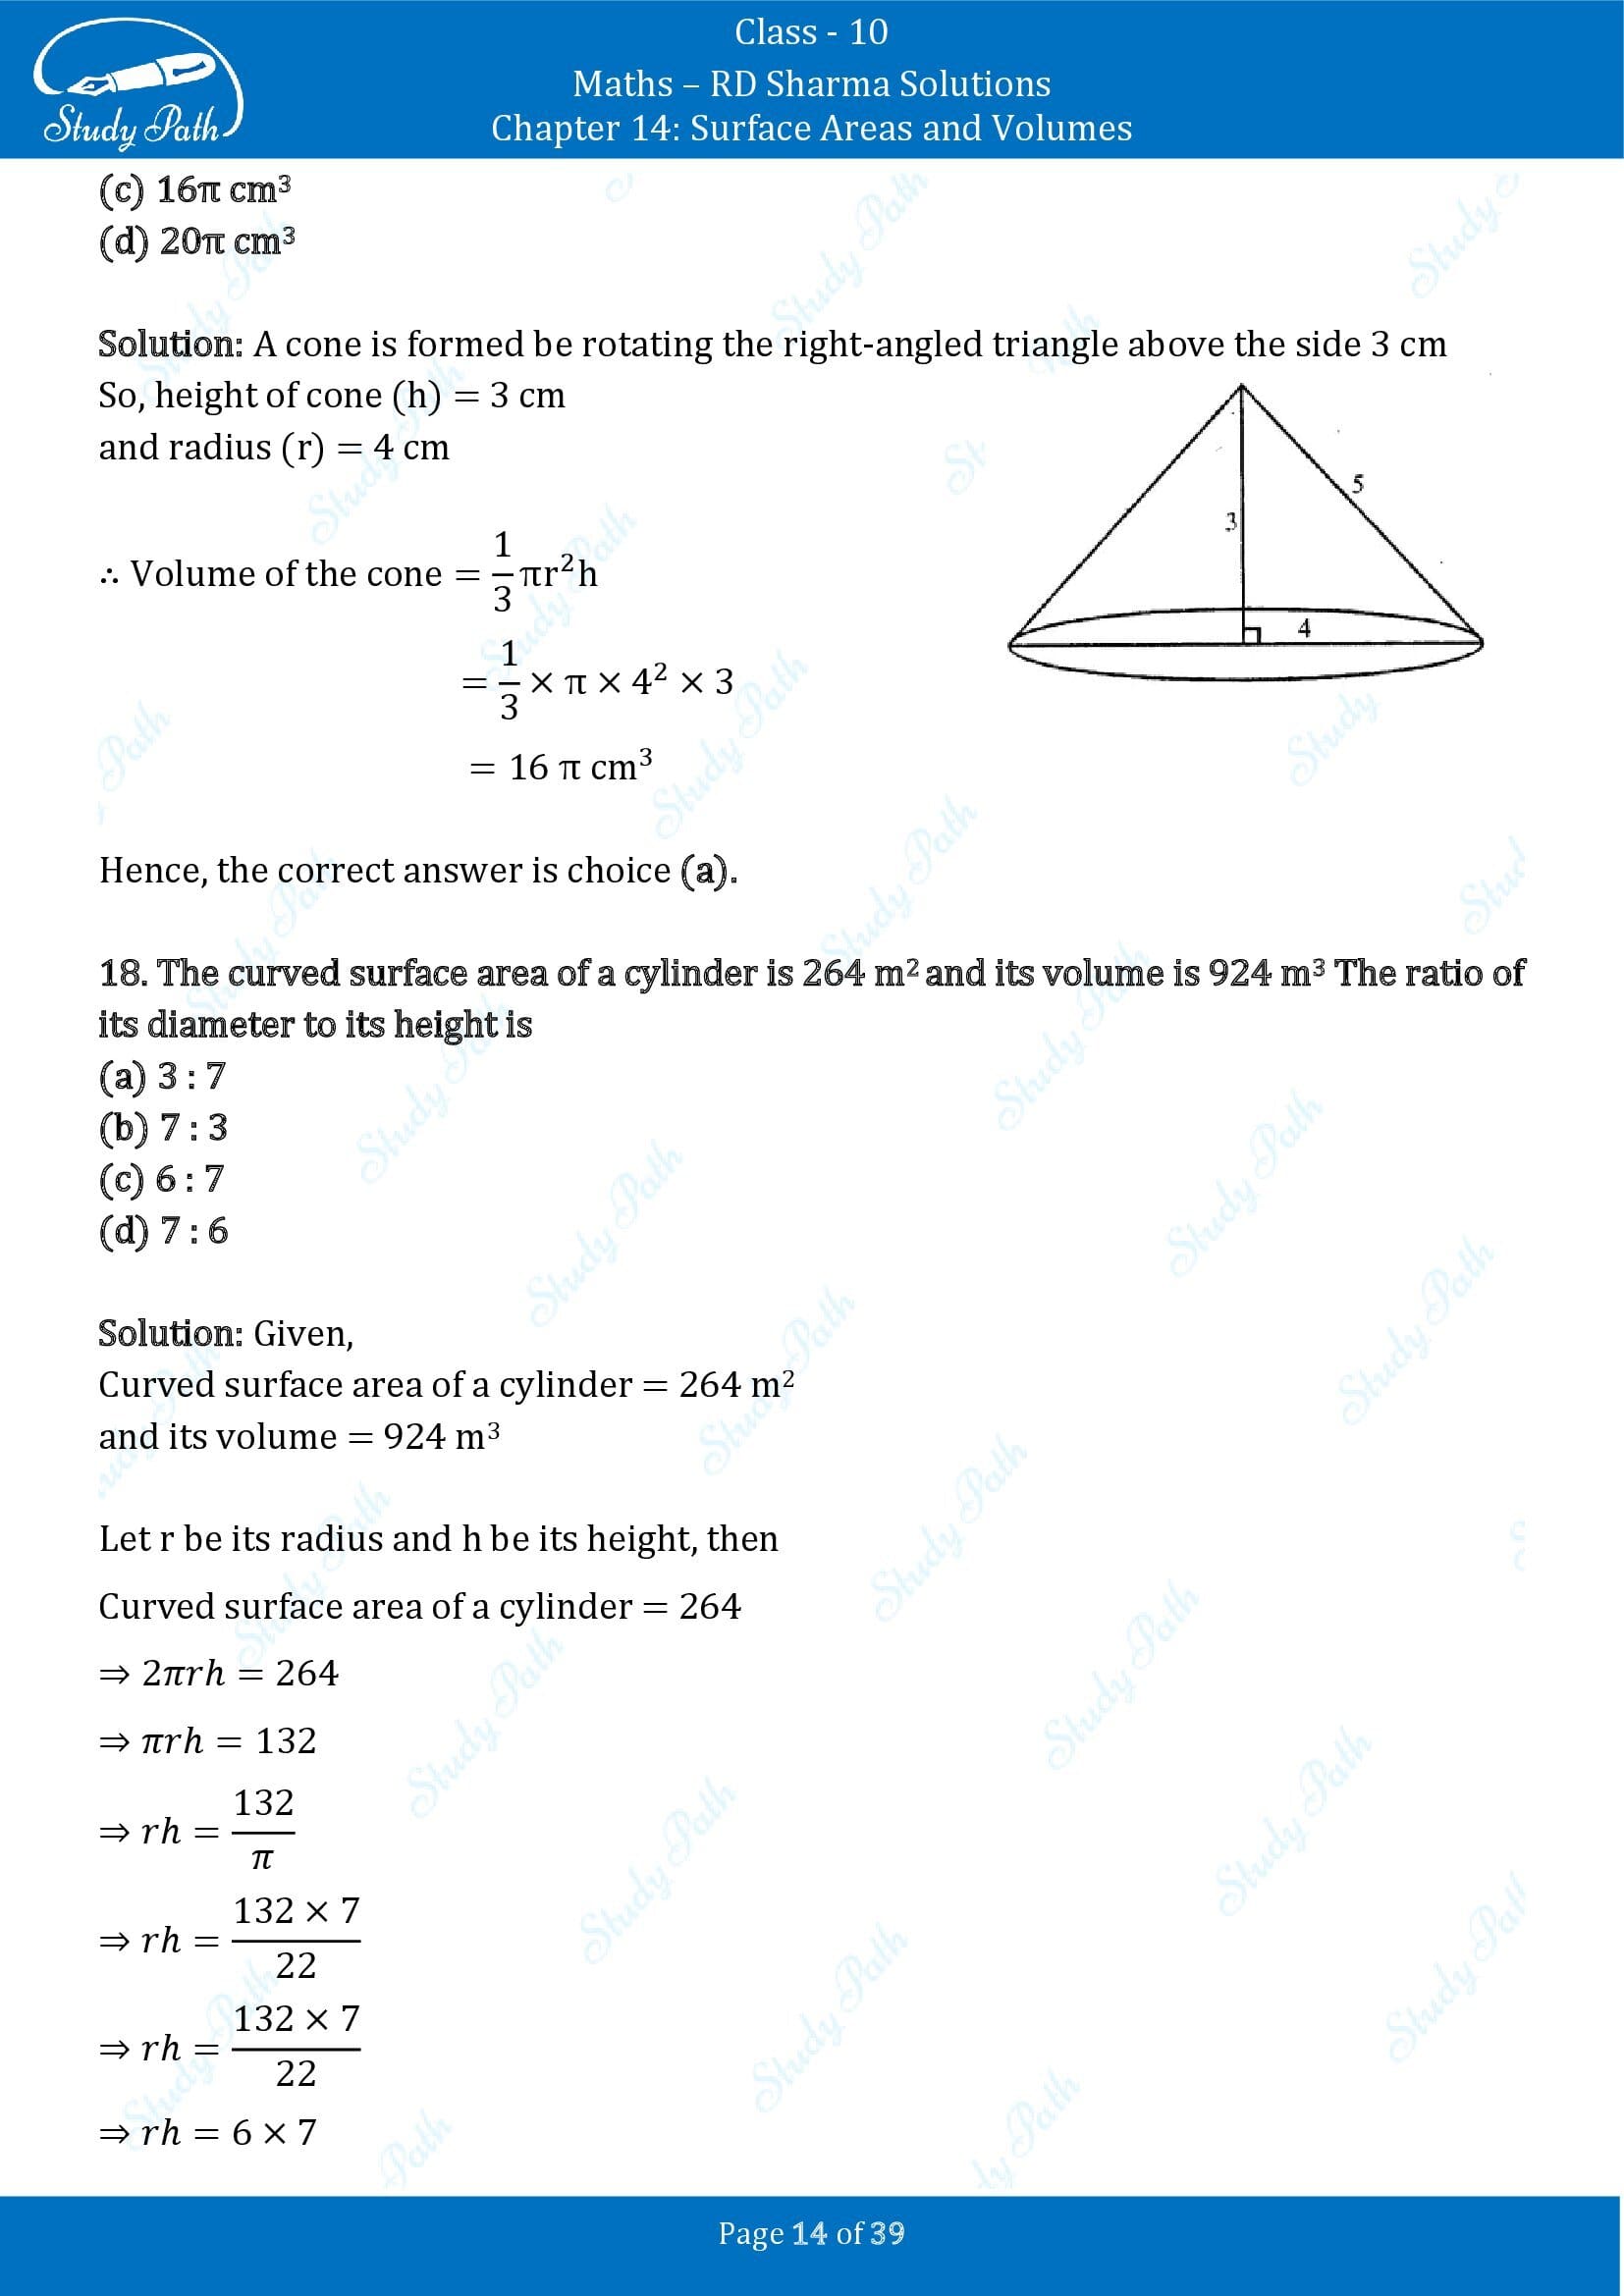 RD Sharma Solutions Class 10 Chapter 14 Surface Areas and Volumes Multiple Choice Question MCQs 00014